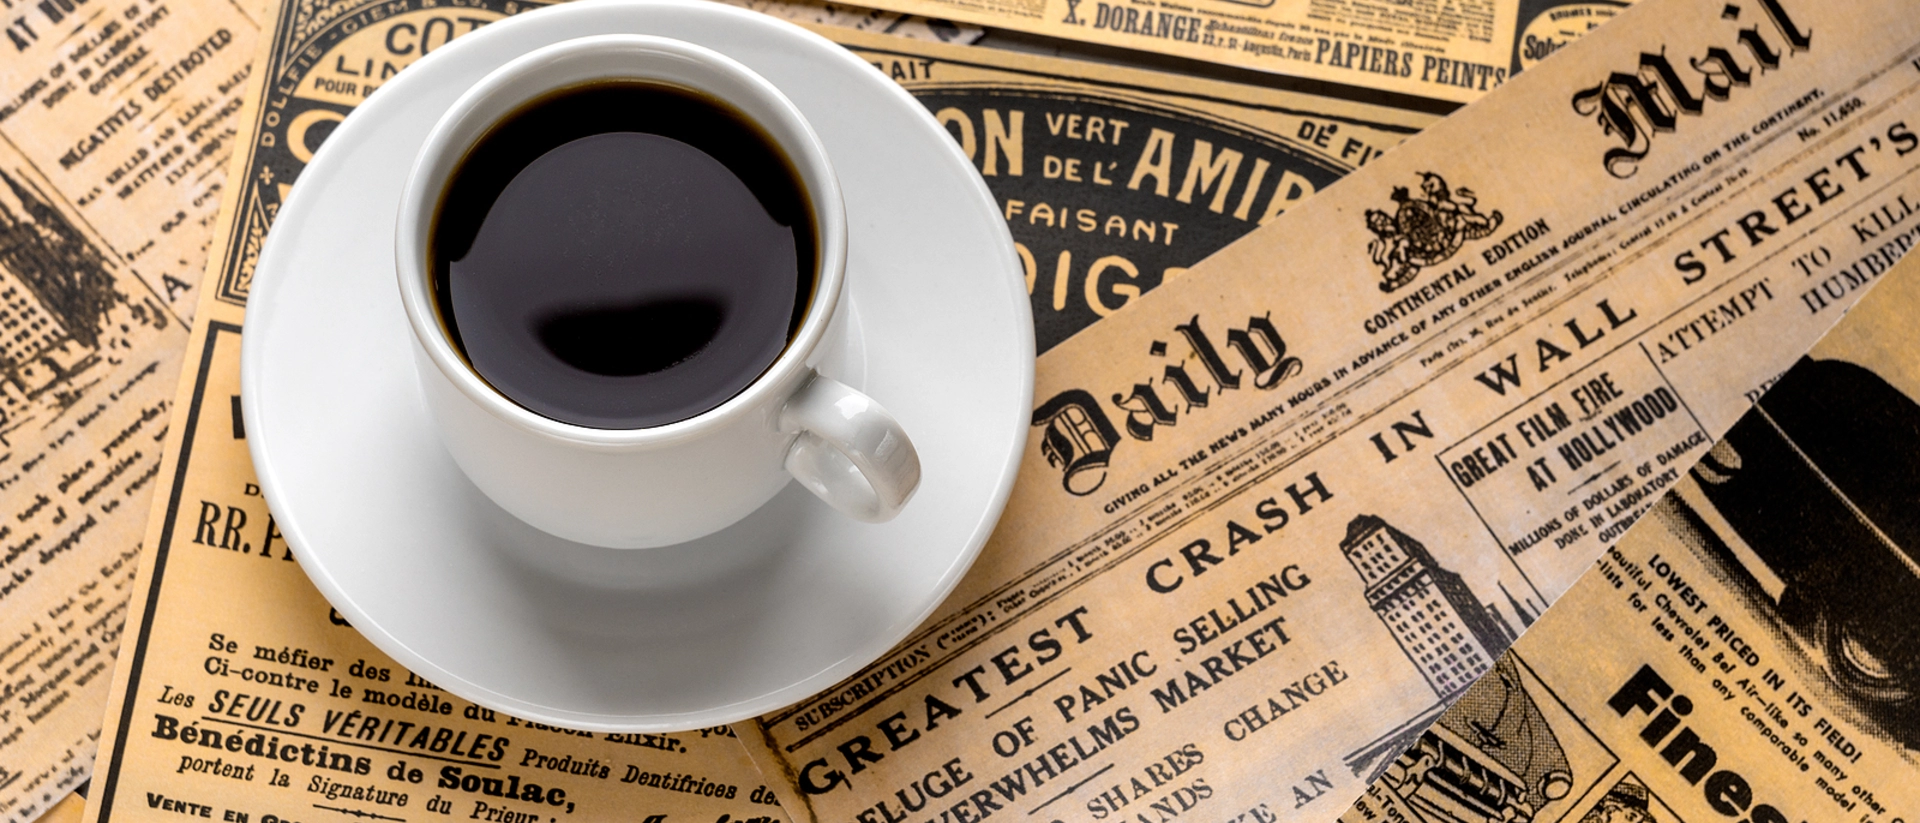 Cup of coffee on top of Daily Mail newspaper